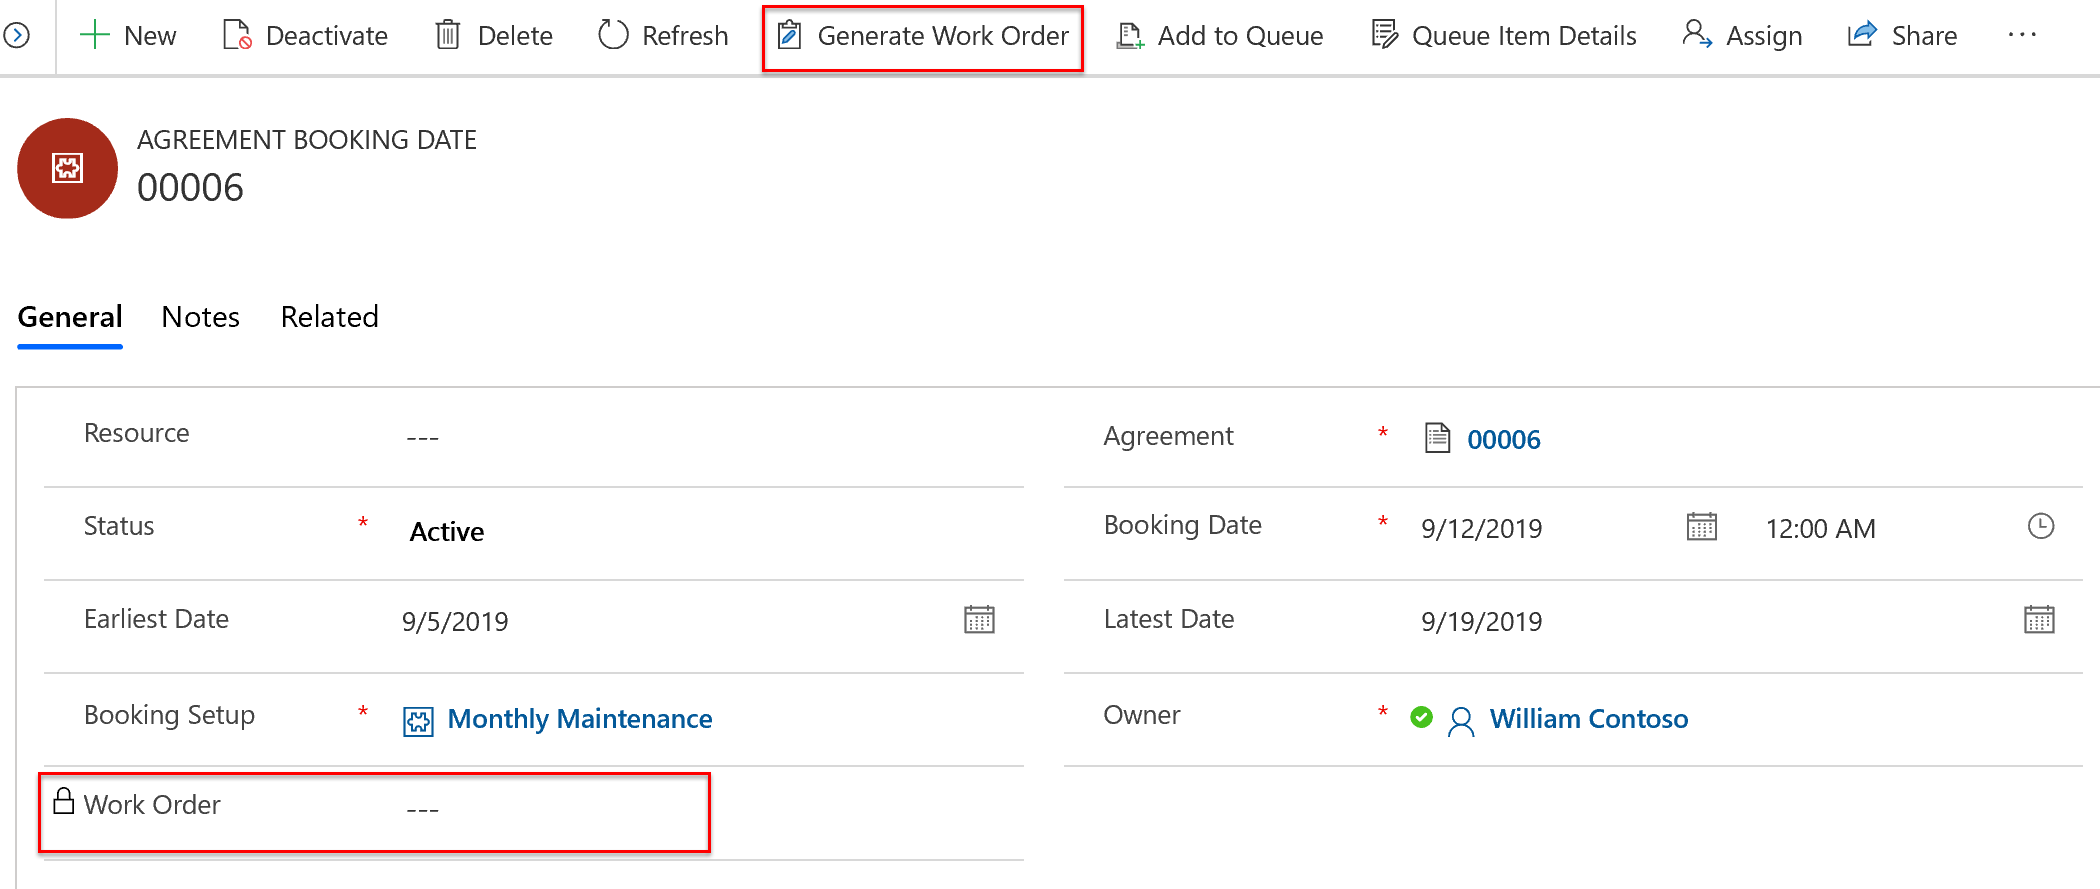 Screenshot of an agreement booking date, with focus on the Generate Work Order option.